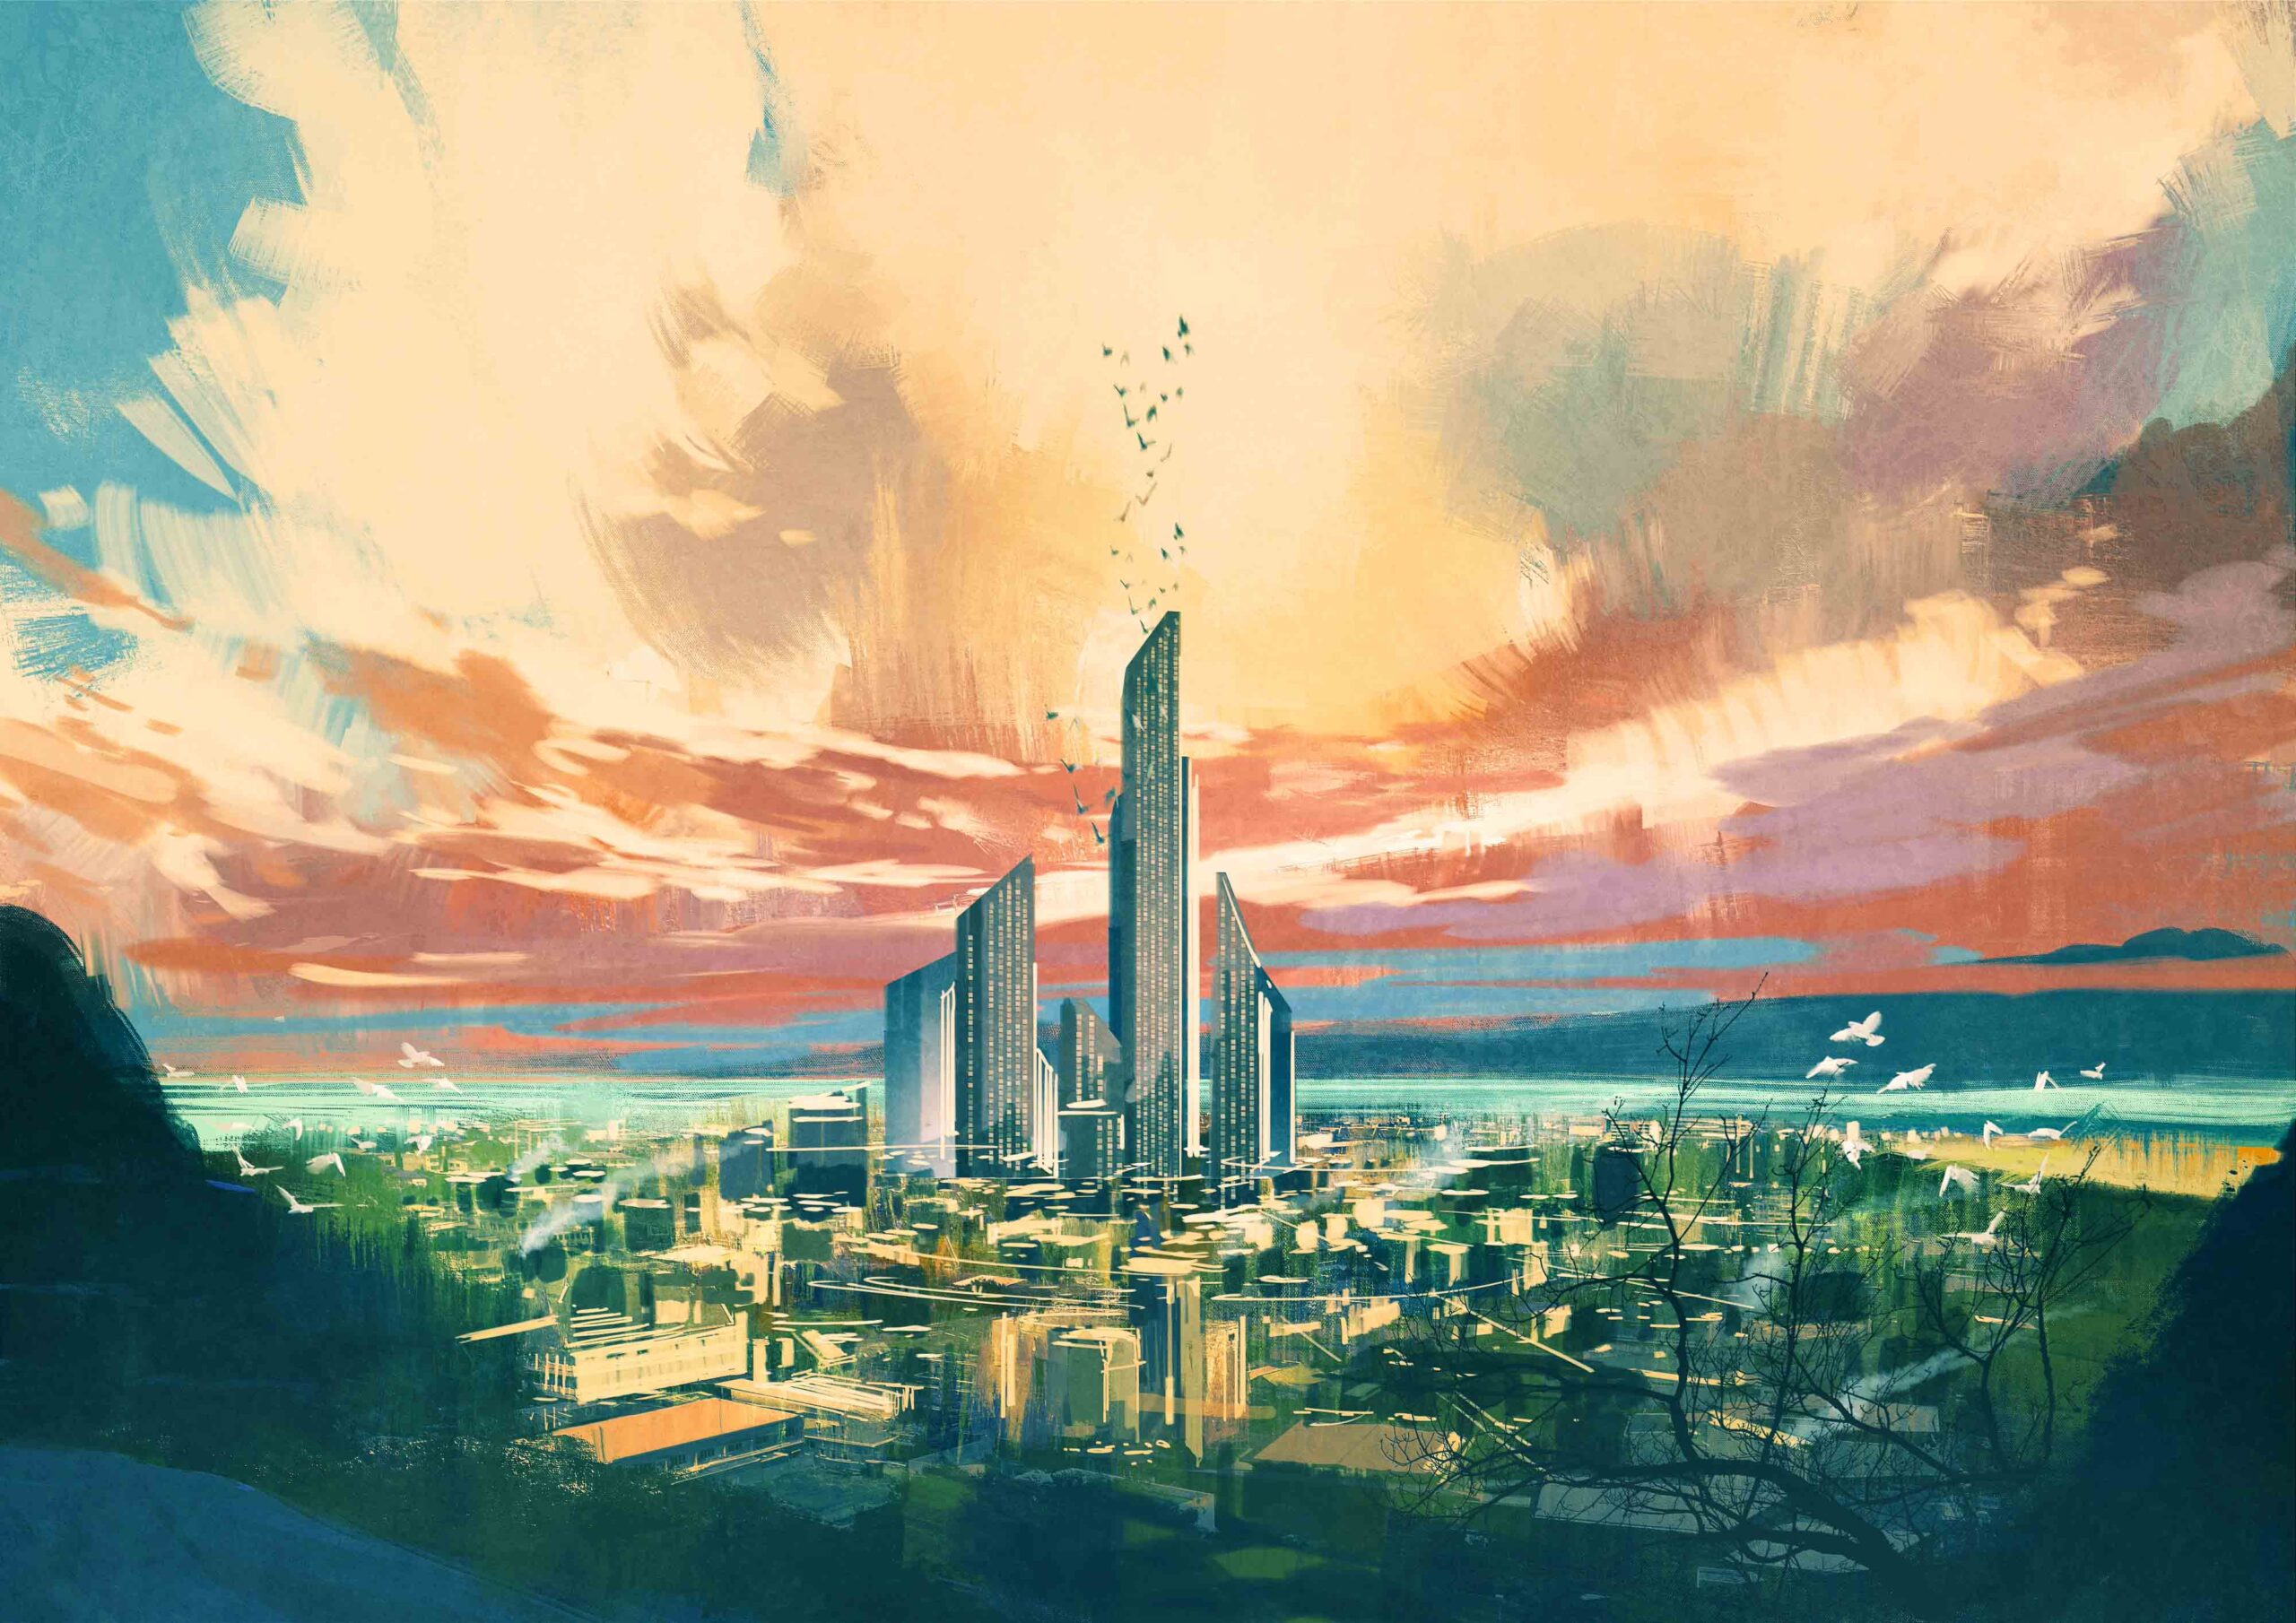 digital painting of futuristic sci-fi city with skyscraper at sunset ,illustration